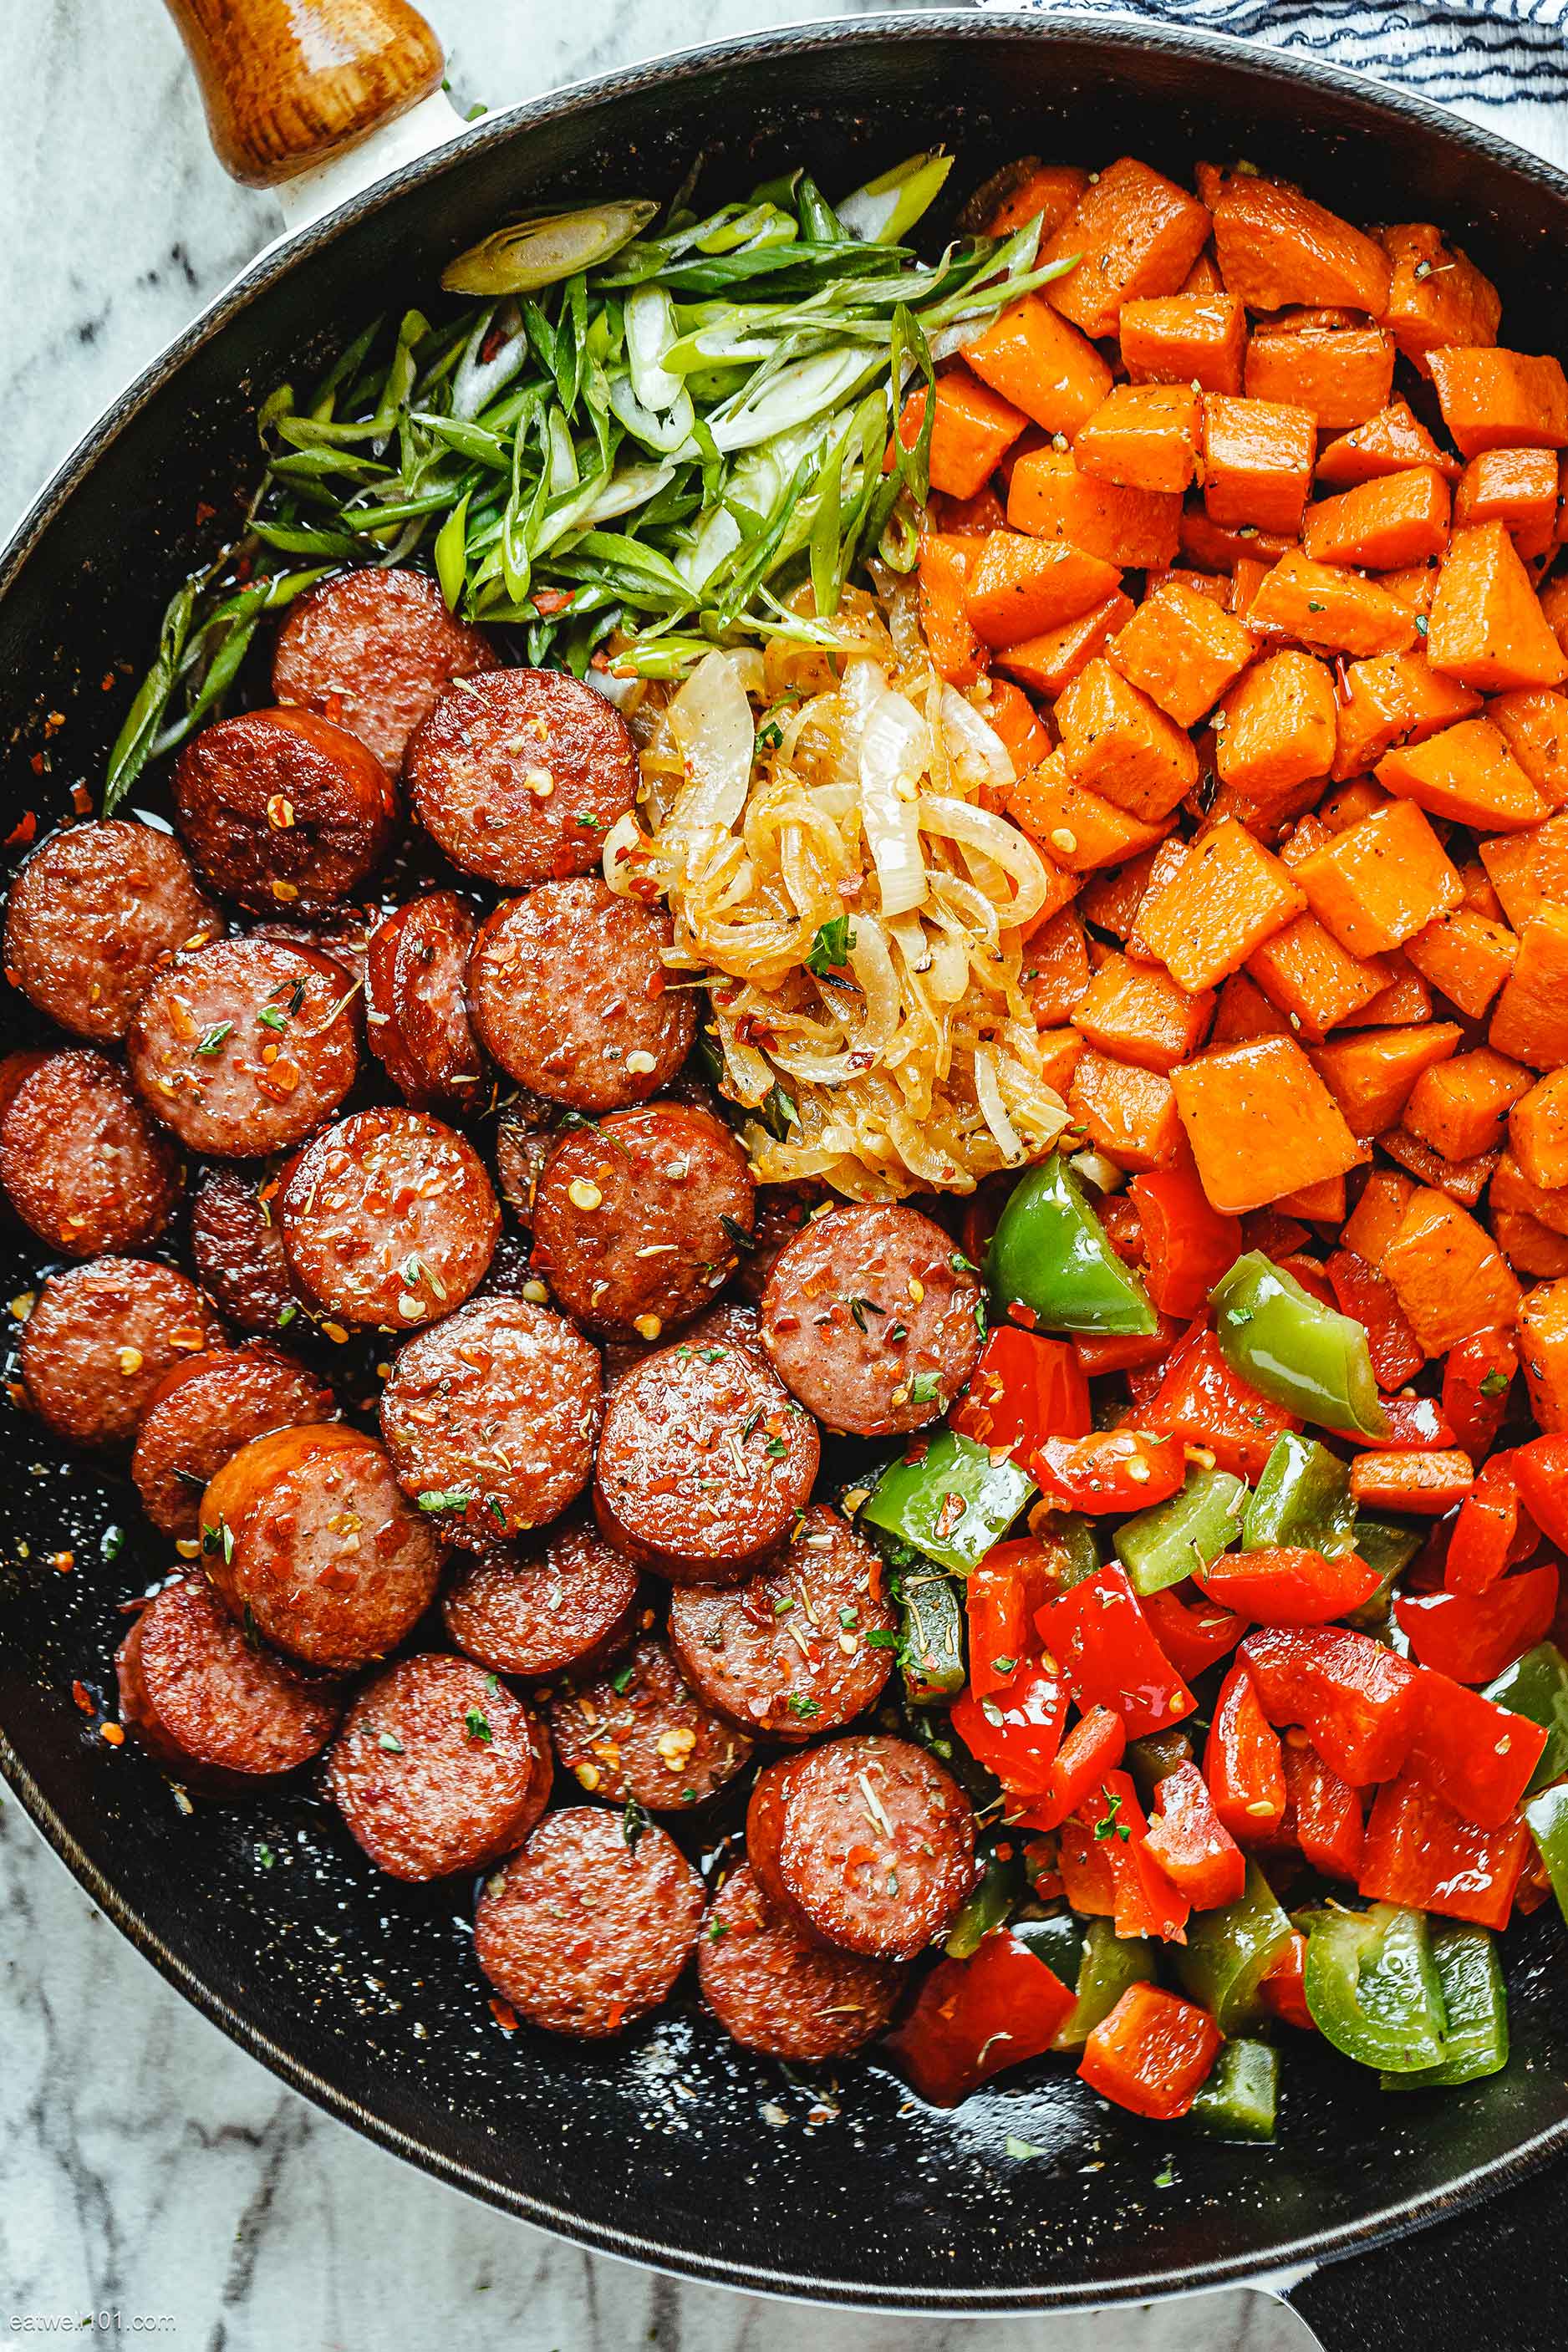 One-Pot Meal Recipes: 30 Cheap & Easy One-Pot Meals — Eatwell101